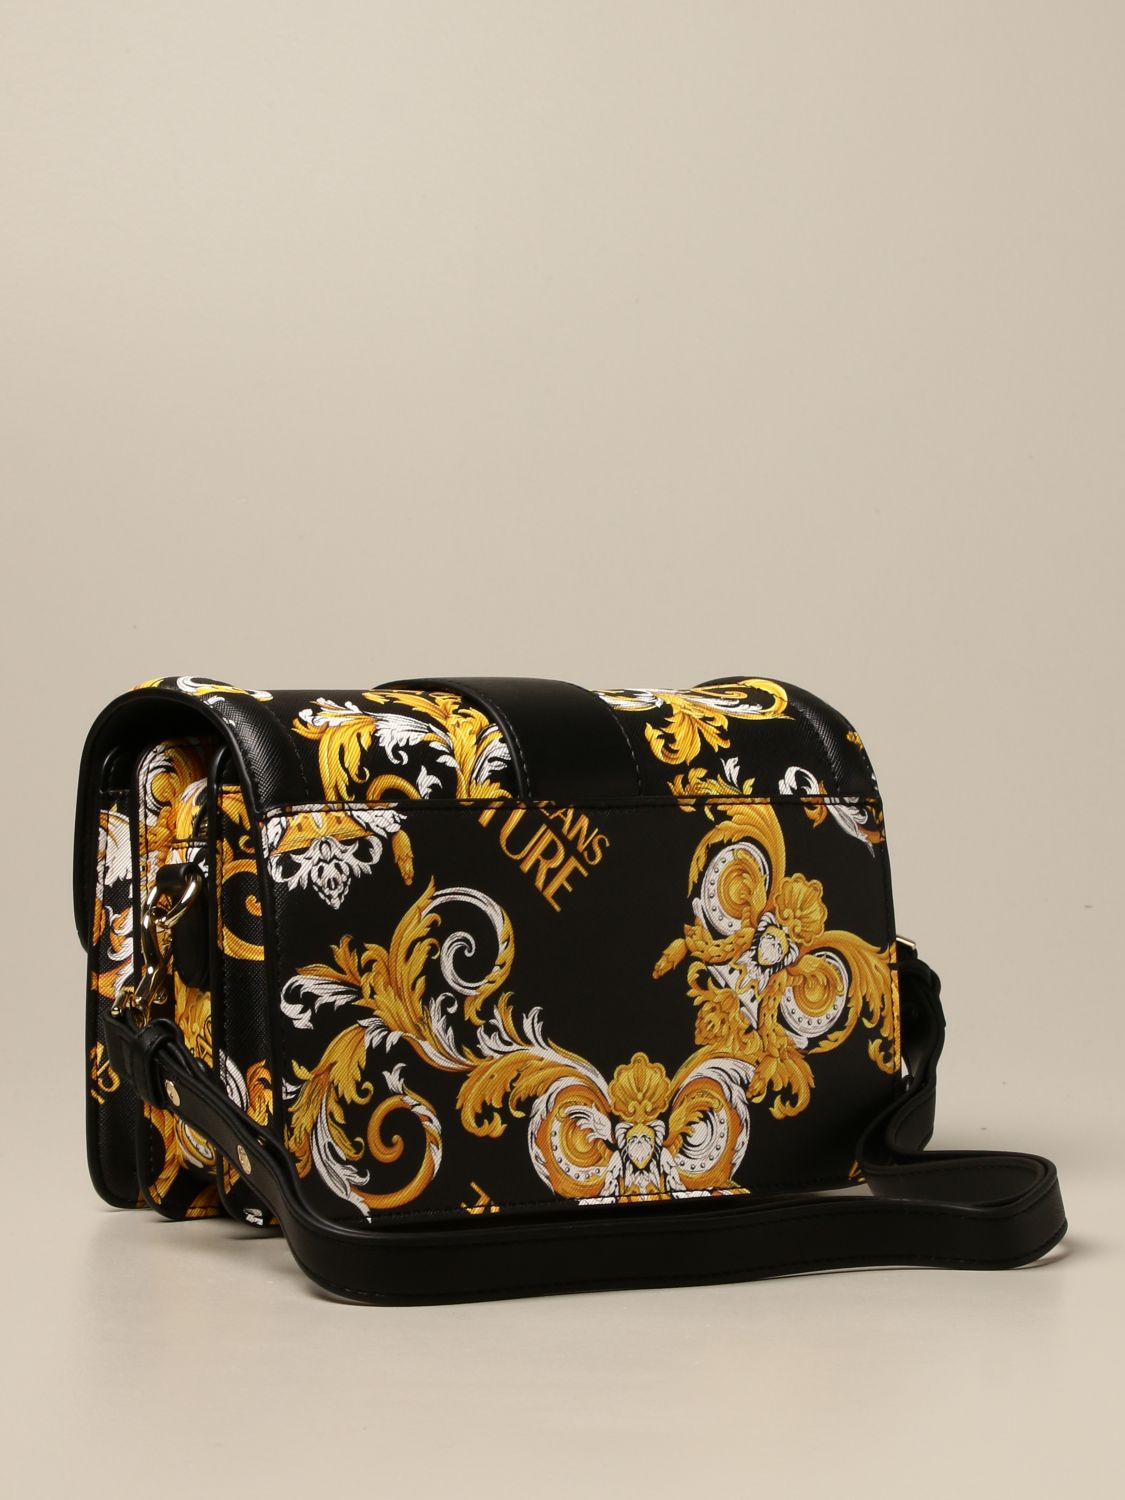 VERSACE JEANS COUTURE: bag in baroque synthetic leather | Crossbody